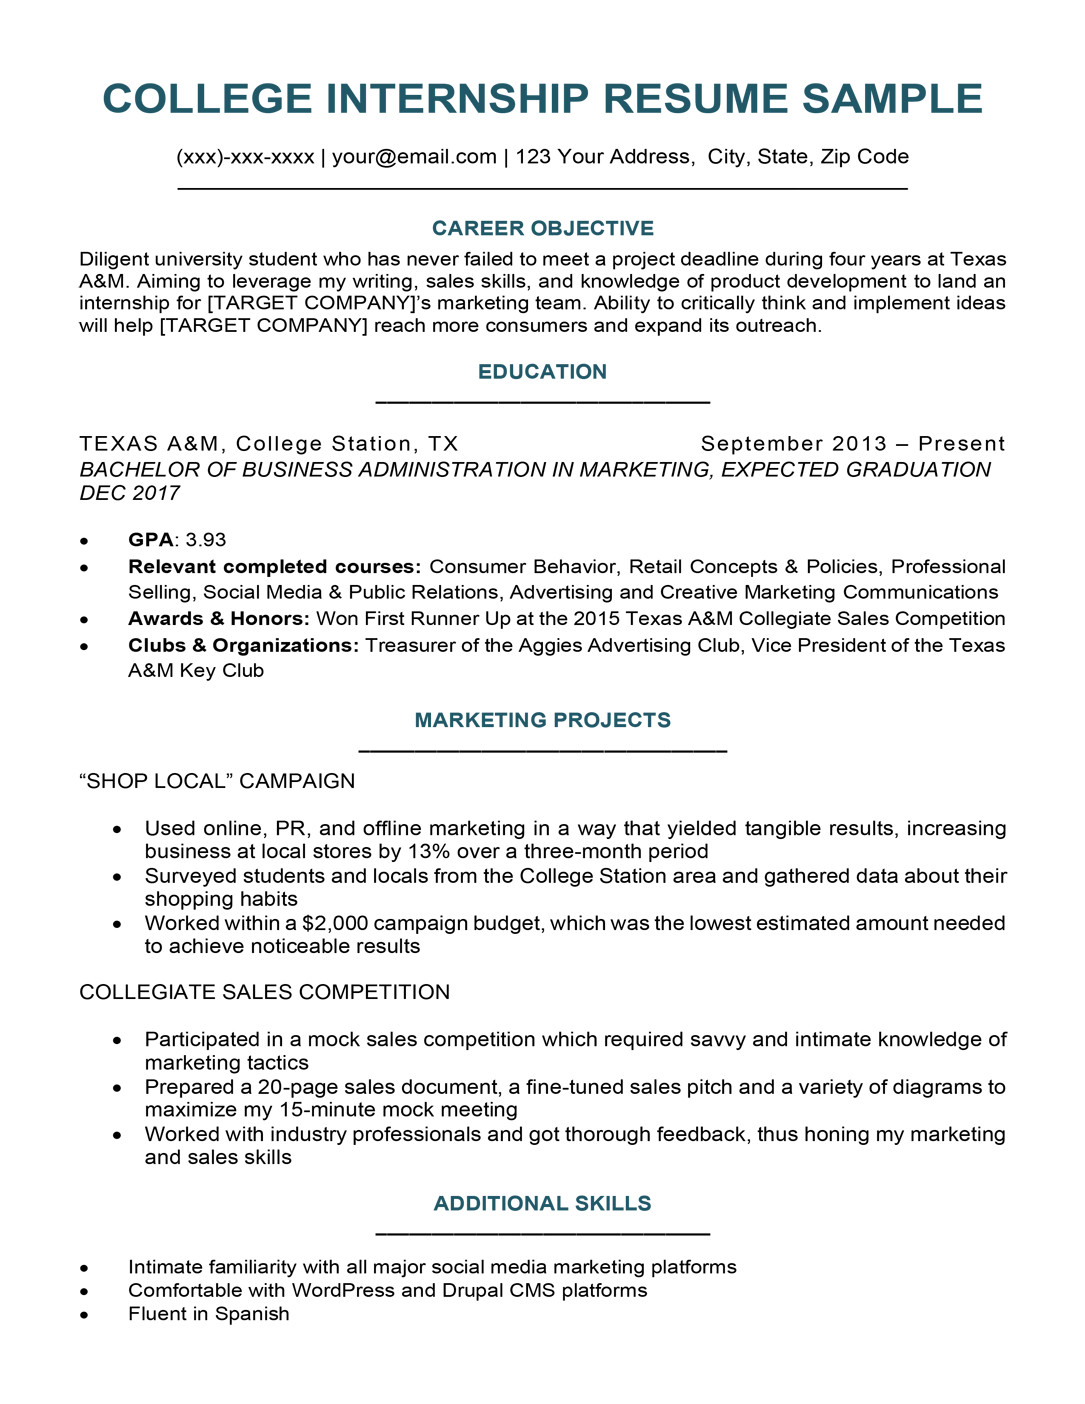 Free Resume Samples for College Students College Student Resume Sample & Writing Tips